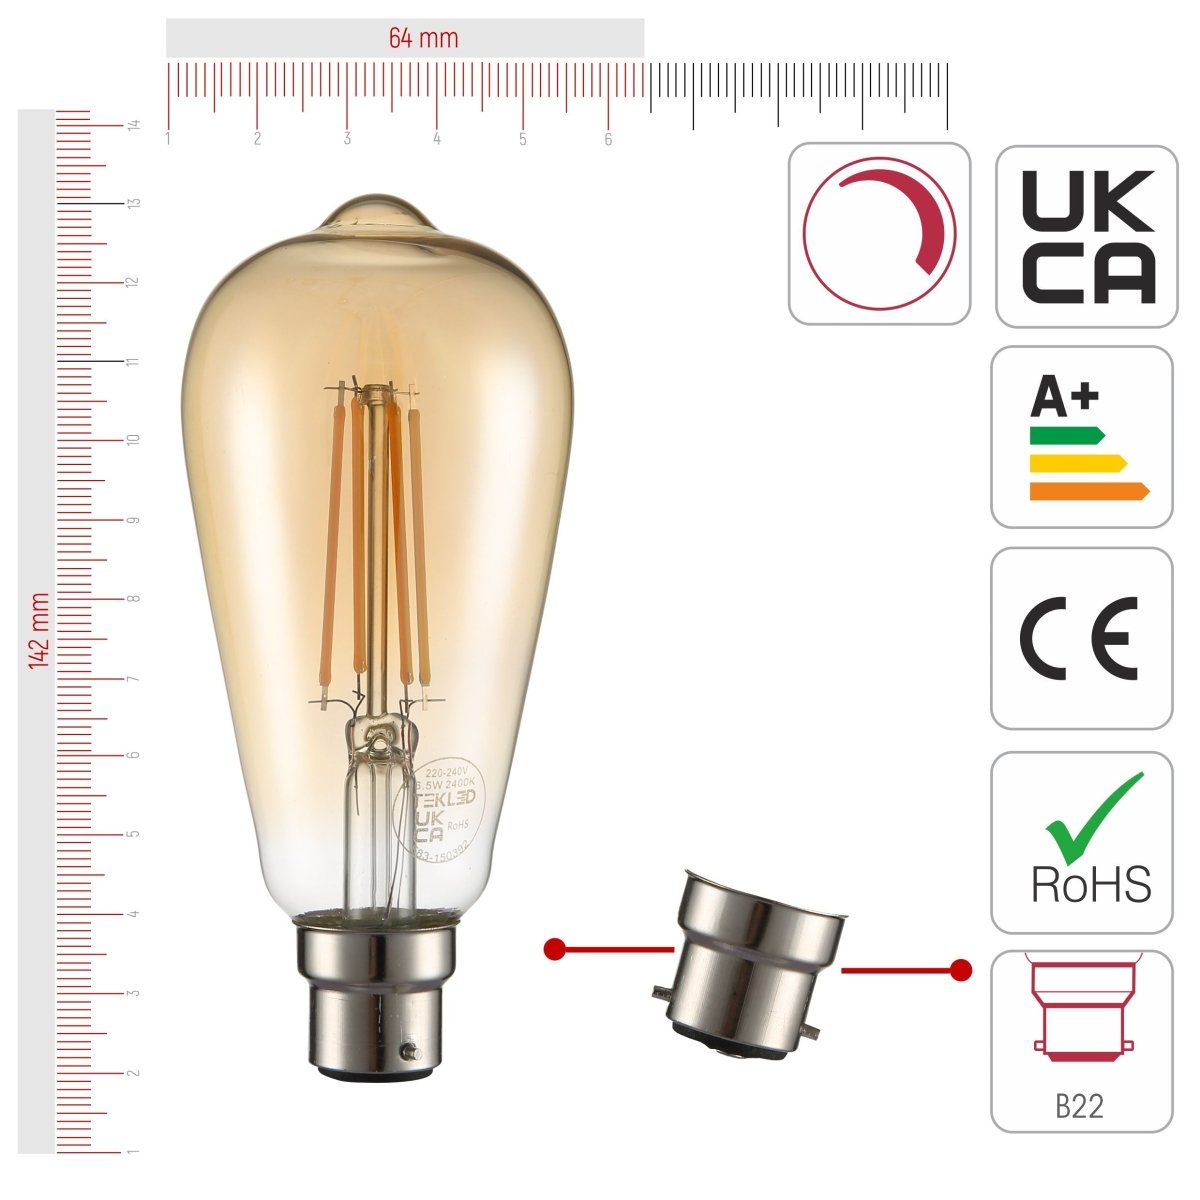 Size and certifications of LED Dimmable Filament Bulb ST64 Edison B22 Bayonet Cap 6.5W 680lm Warm White 2400K Amber Pack of 2 | TEKLED 583-150392